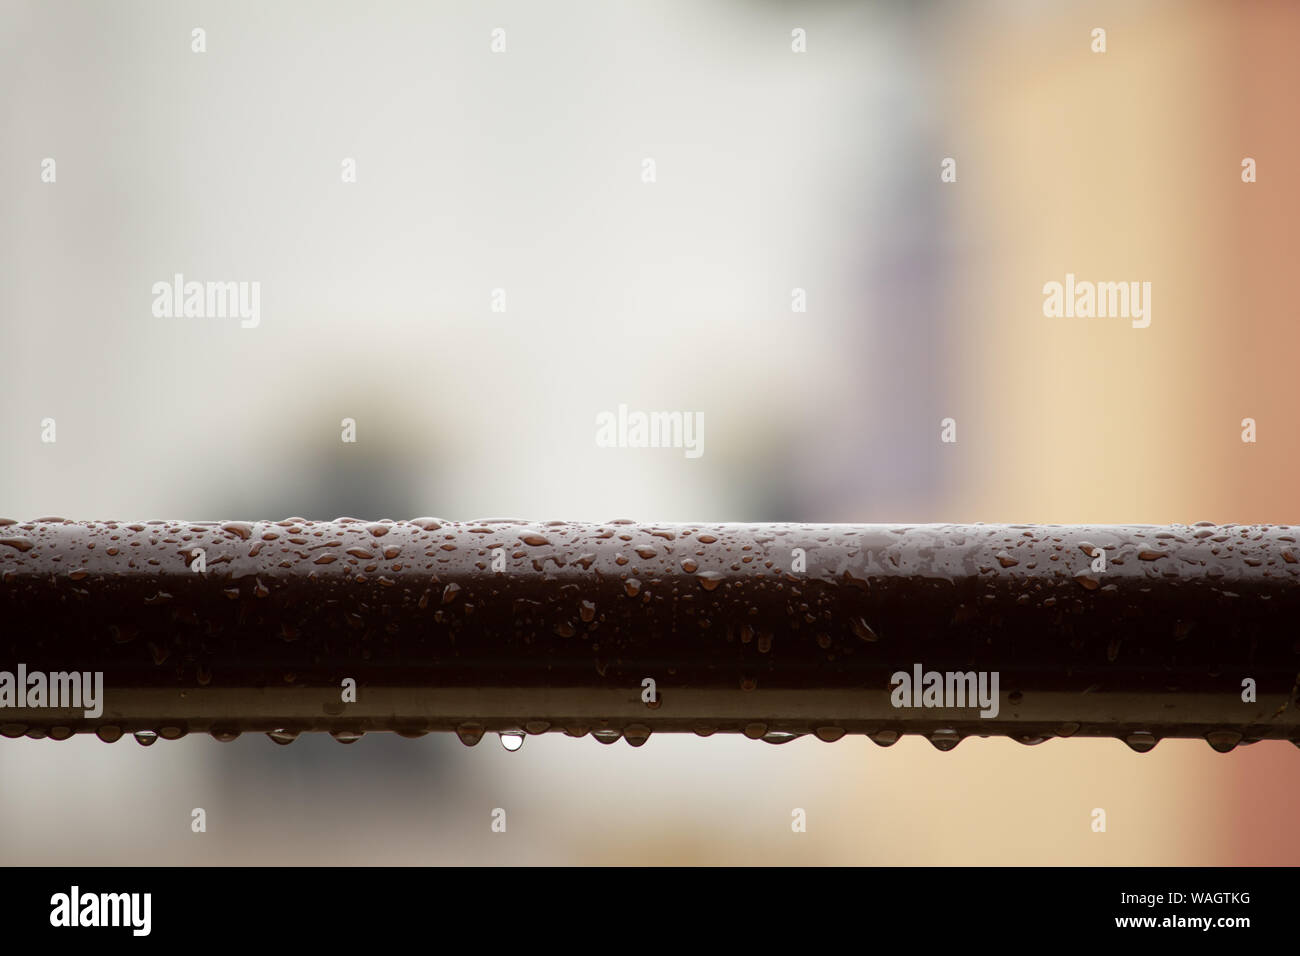 Water droplets from rain over the hand rail Stock Photo